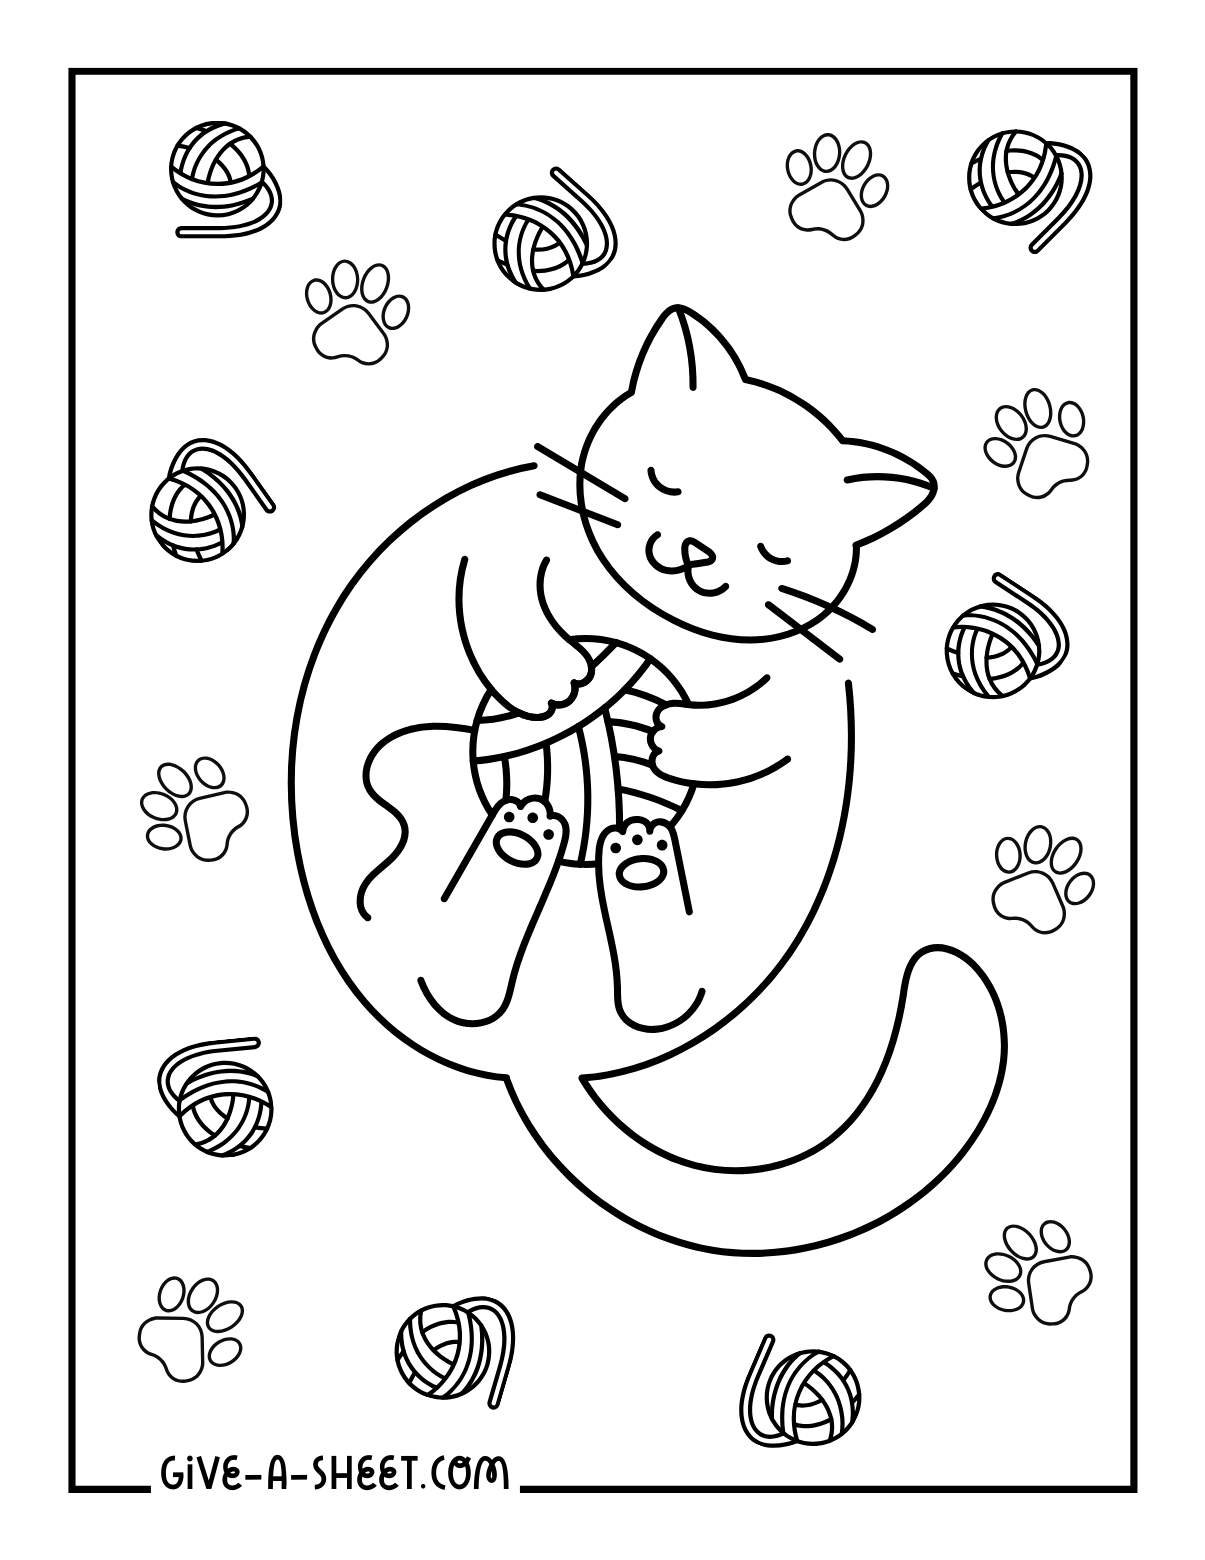 Amigurumi kittens coloring page for kids.